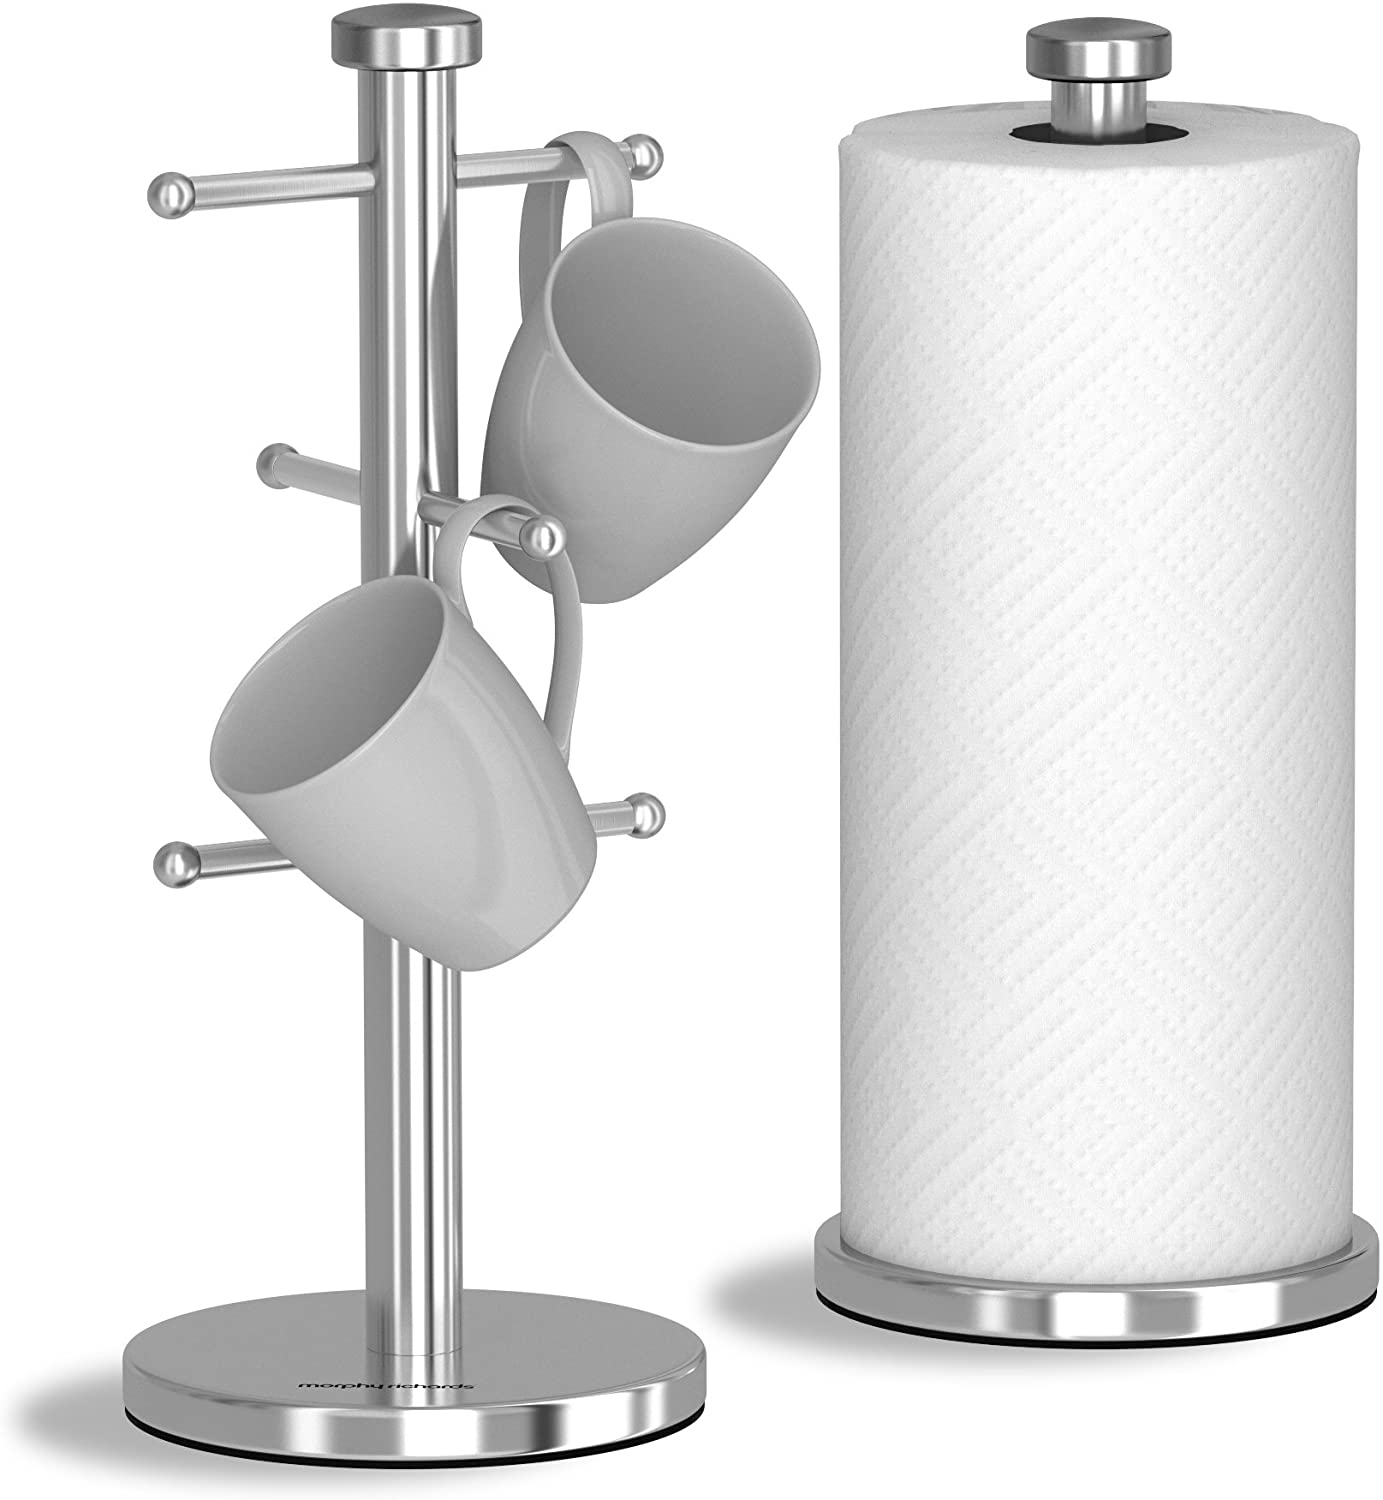 Morphy Richards – Accents Mug Tree & Kitchen Roll Holder, Stainless Steel, S/STEEL, Set of 6